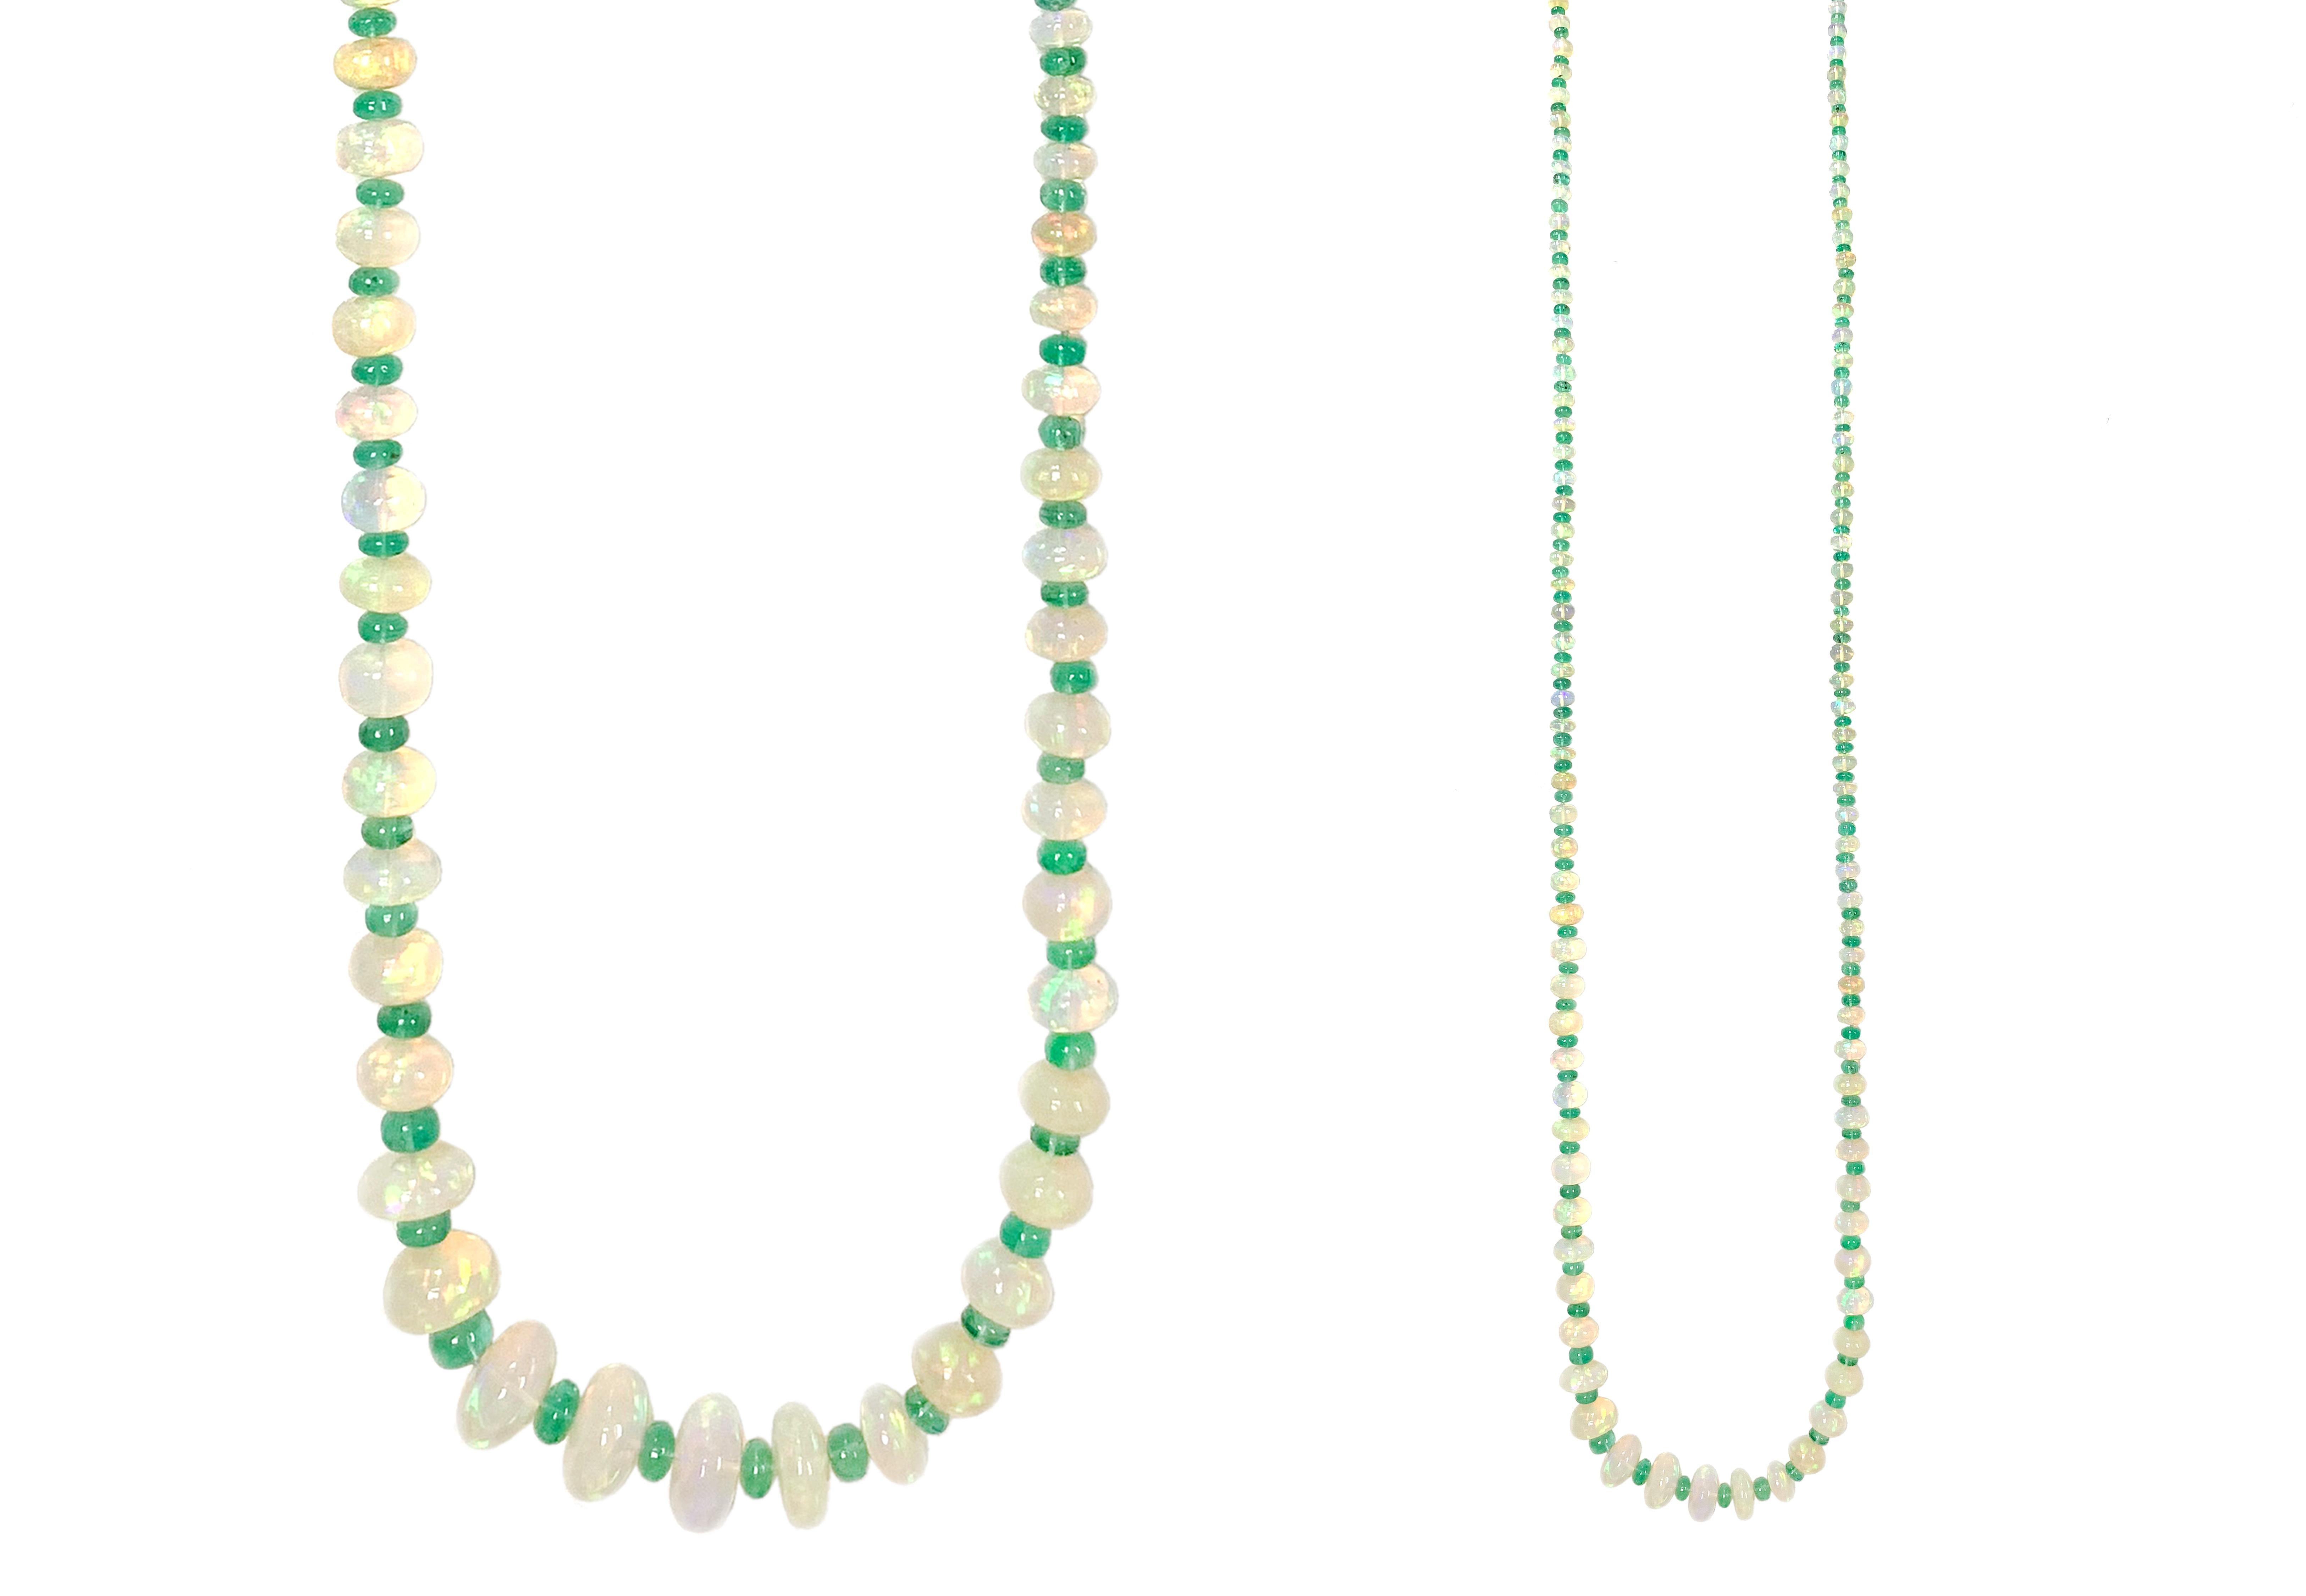 1 Strand Opal and Emerald Beads Necklace Length 38